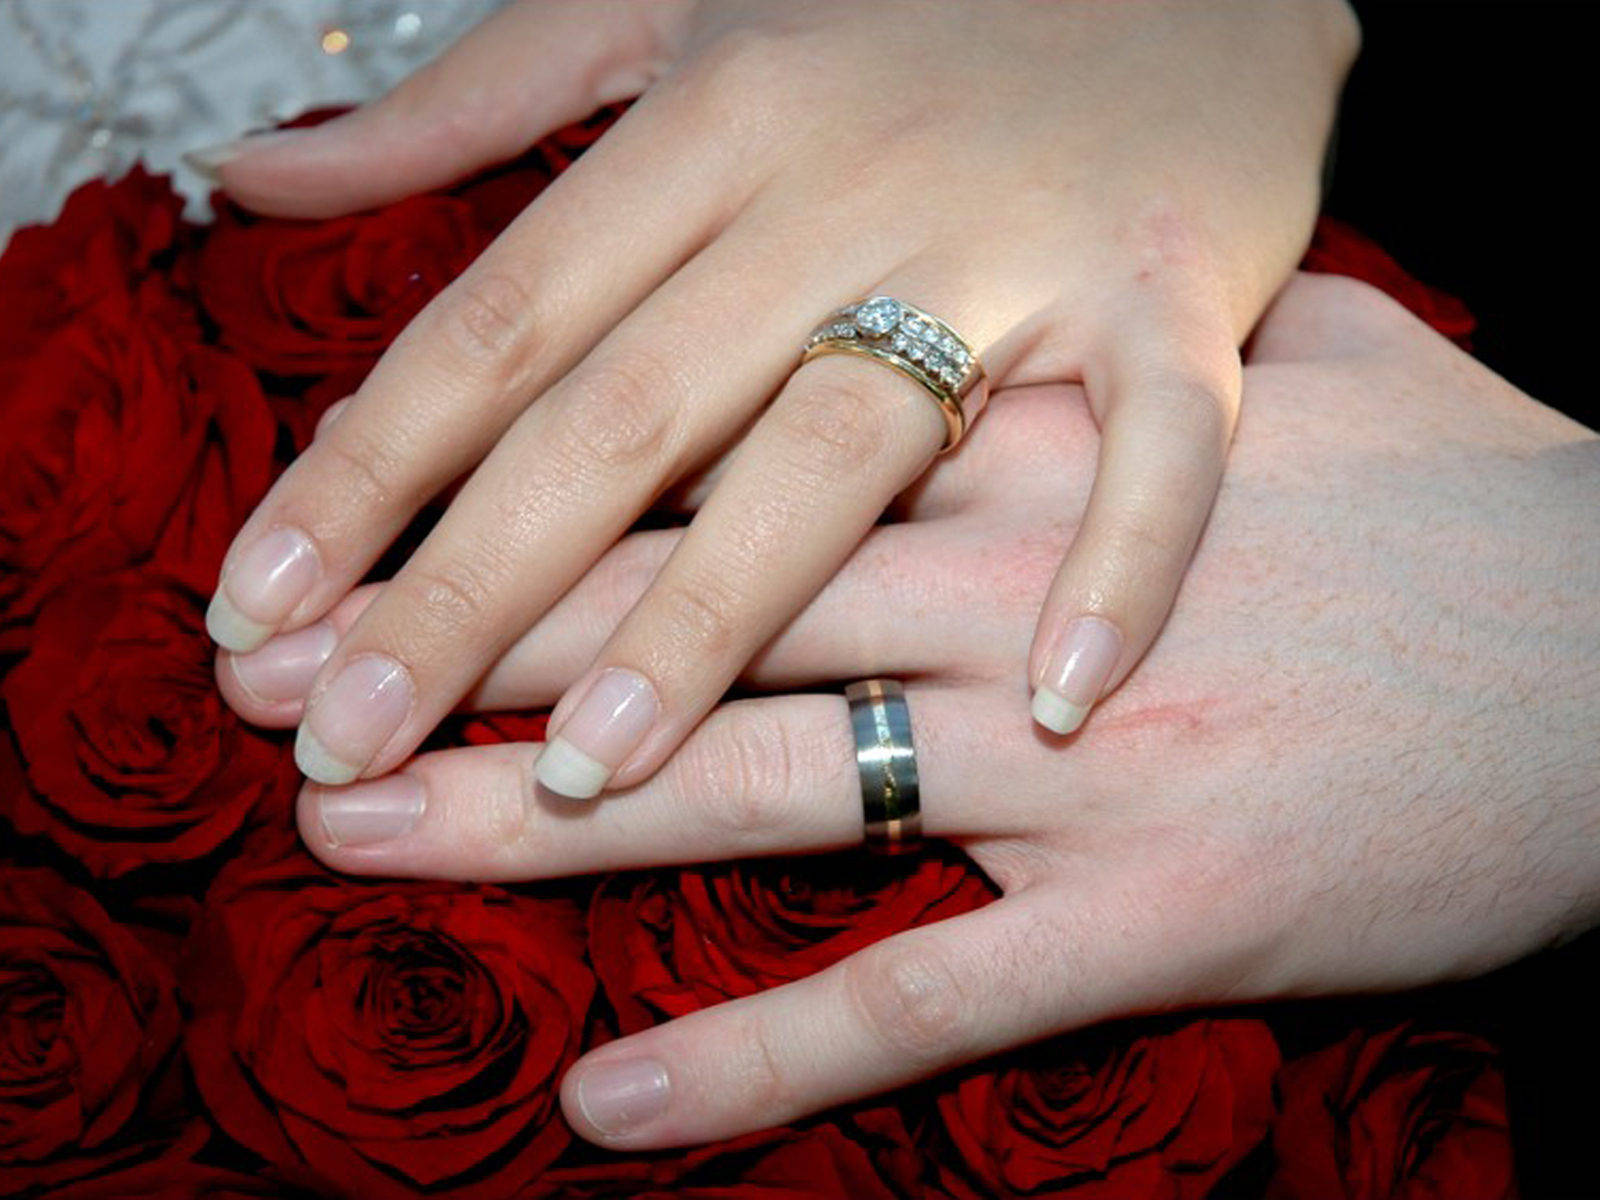 Intimate Holding Hands With Rings On Roses Background